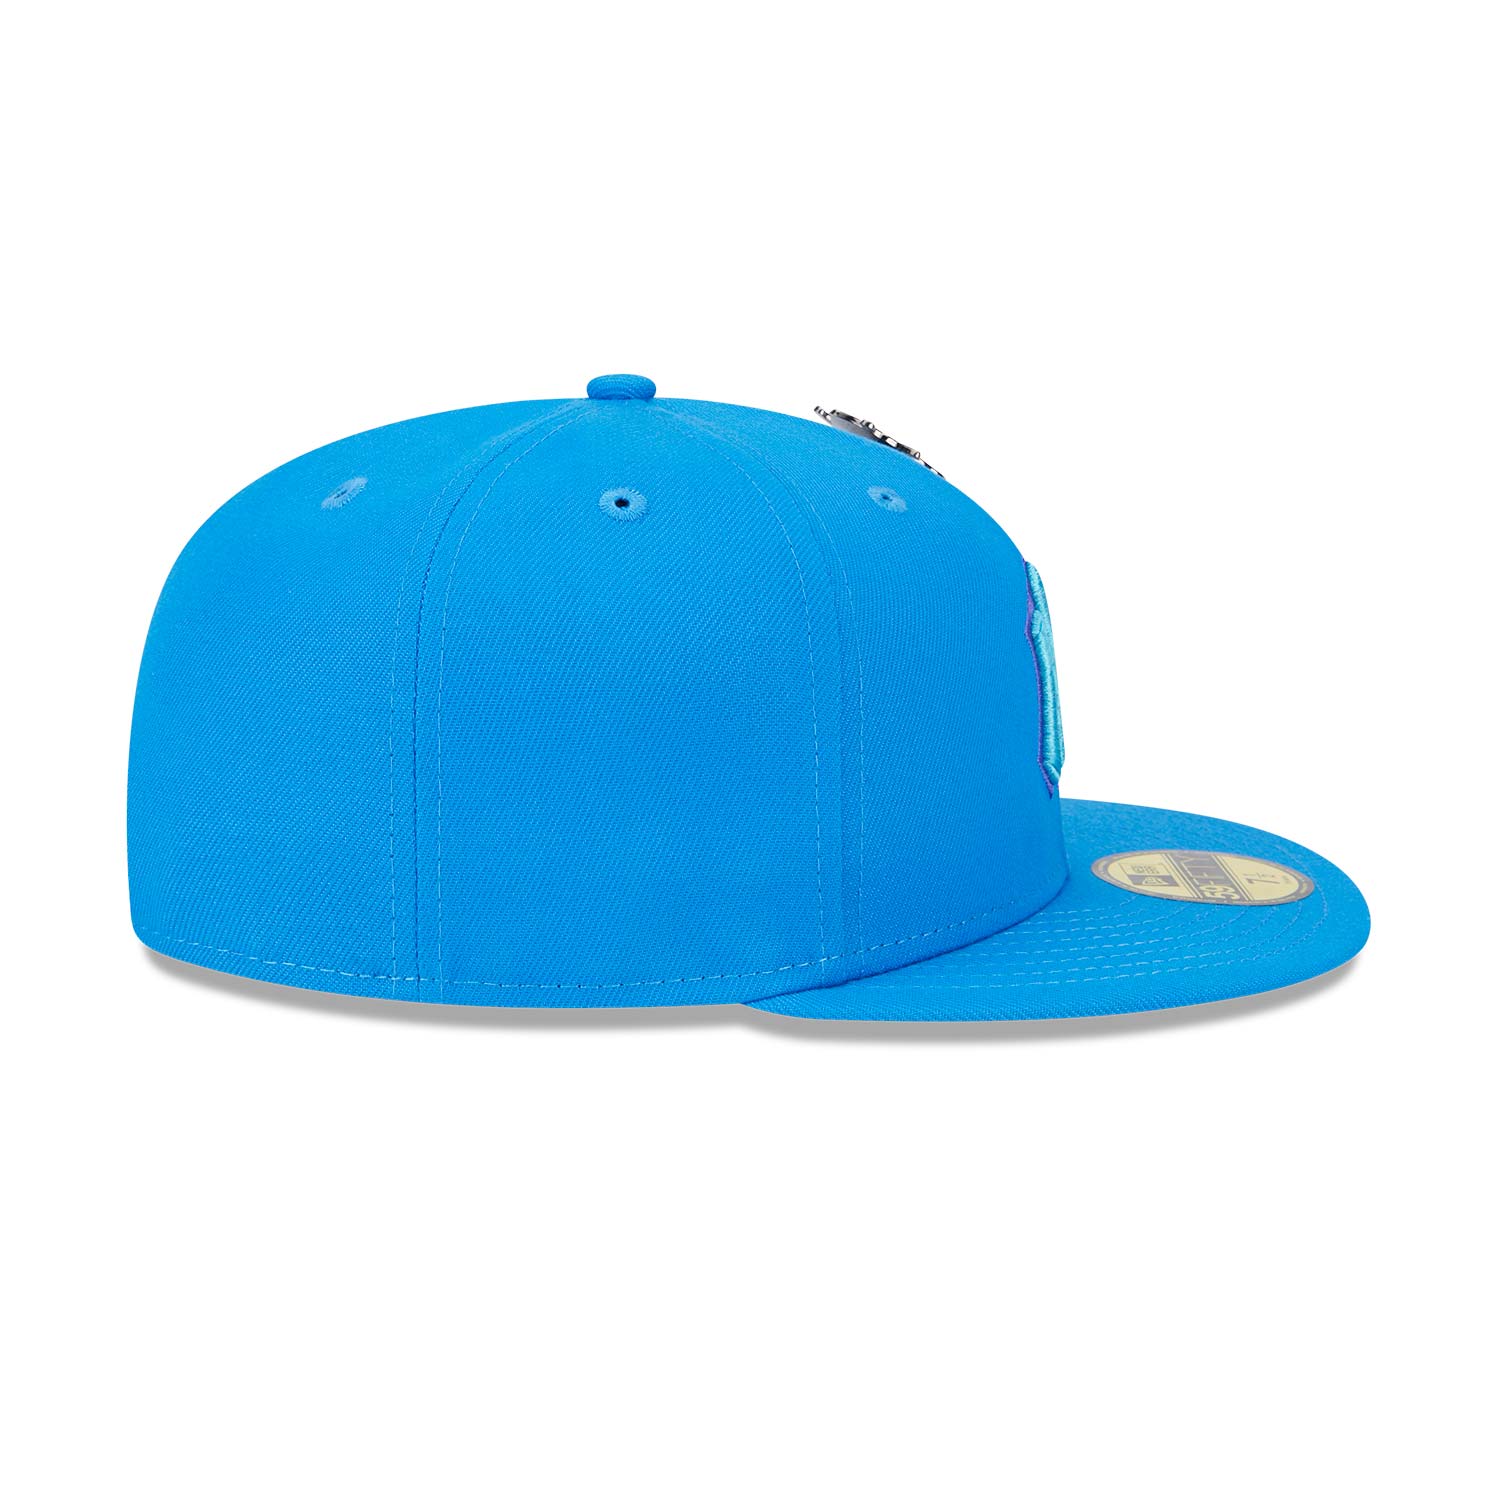 New York Yankees Outer Space Blue 59FIFTY Fitted Cap